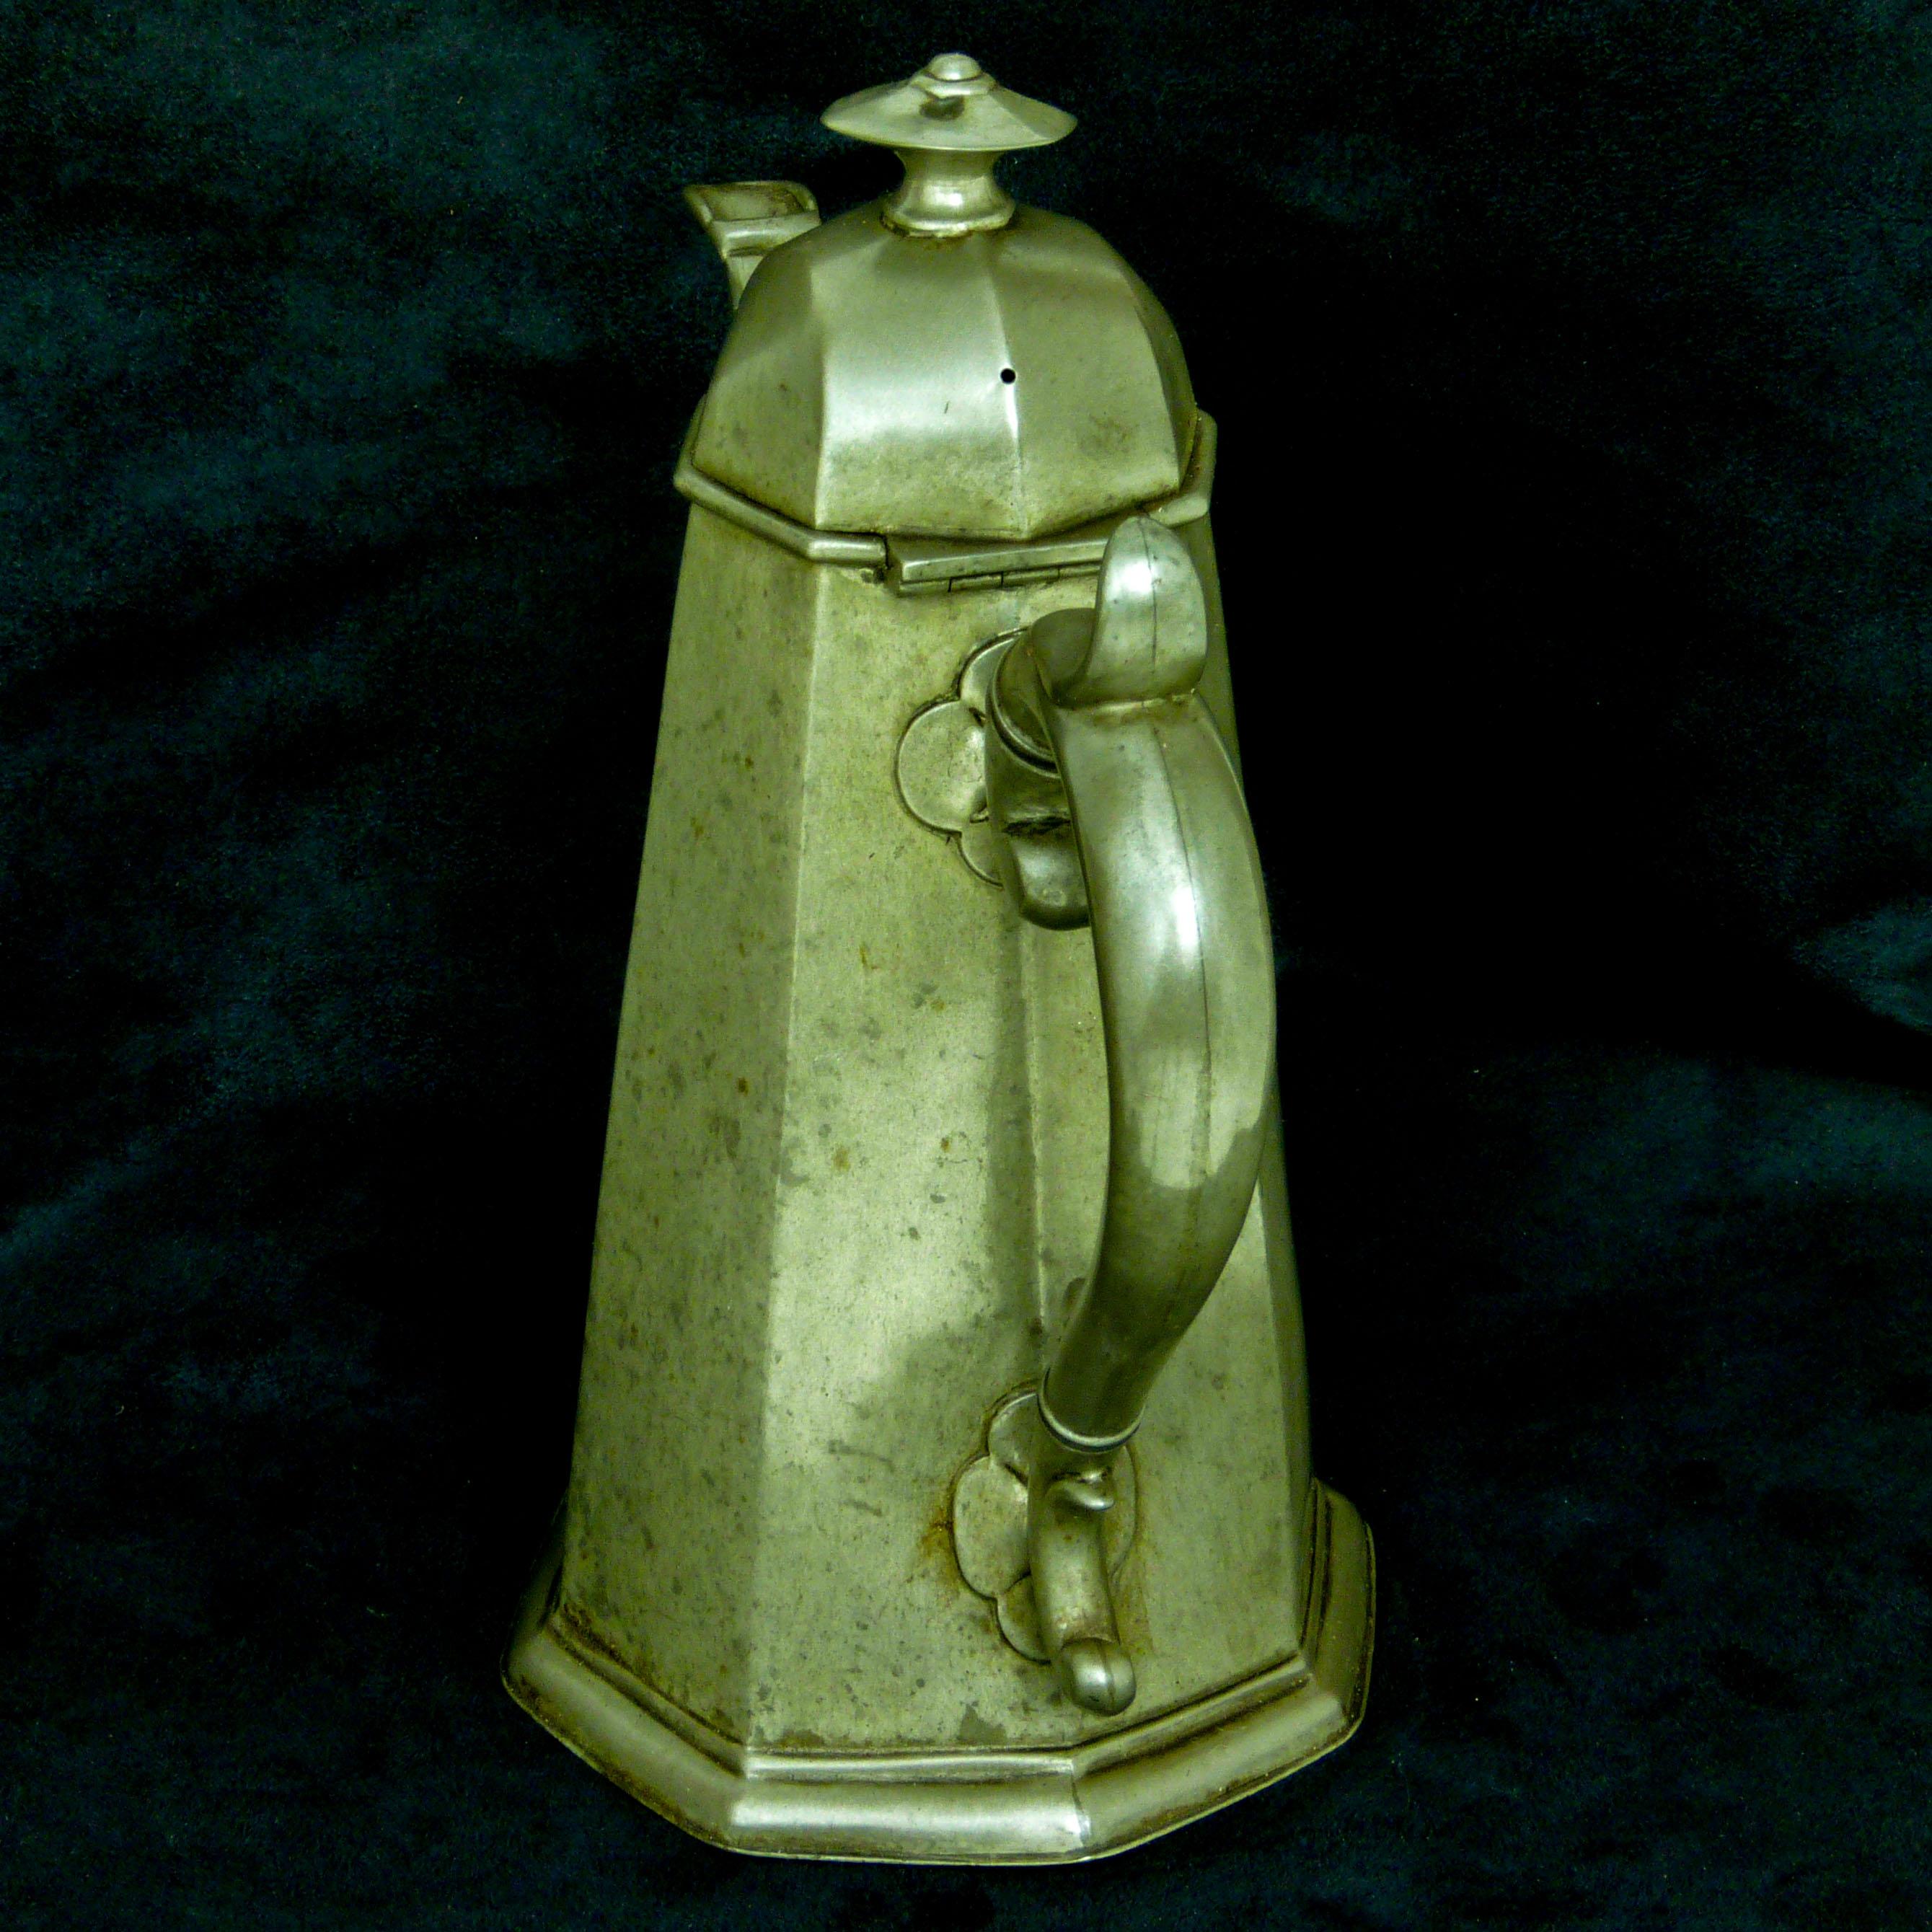 A Britannia metal Victorian coffee pot, in a more restrained 18th century style. Made in Sheffield and of warm pewter colour. A lovely elegant coffee pot in excellent condition. As with all coffee pots of this age there will be odd knocks and